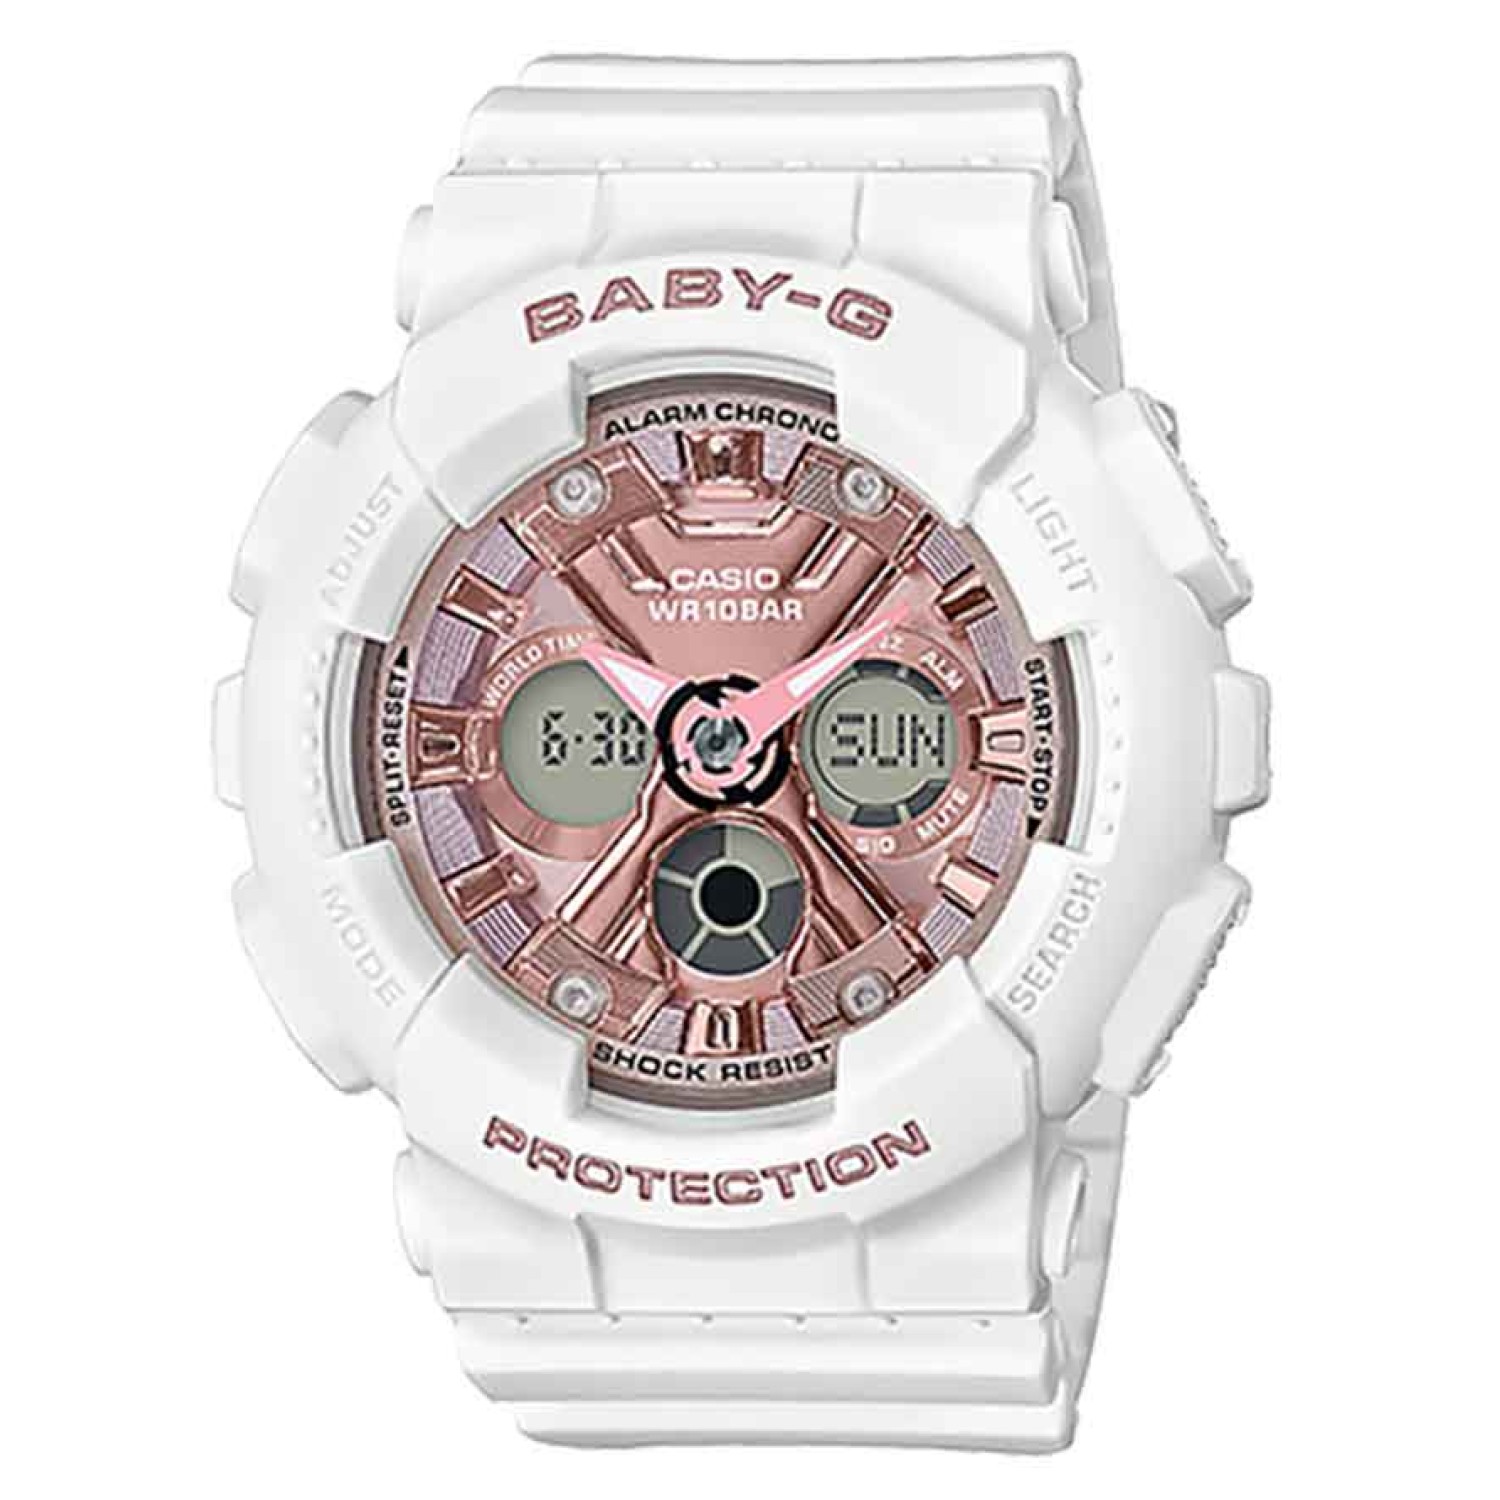 BA130-7A1 Casio BabY-G Special Colours Limited Series. From BABY-G, the casual watch for active women, come new models to accent street fashions. The base model is the BA-130, which is a compact version of the popular G-SHOCK design. The colours of the wh